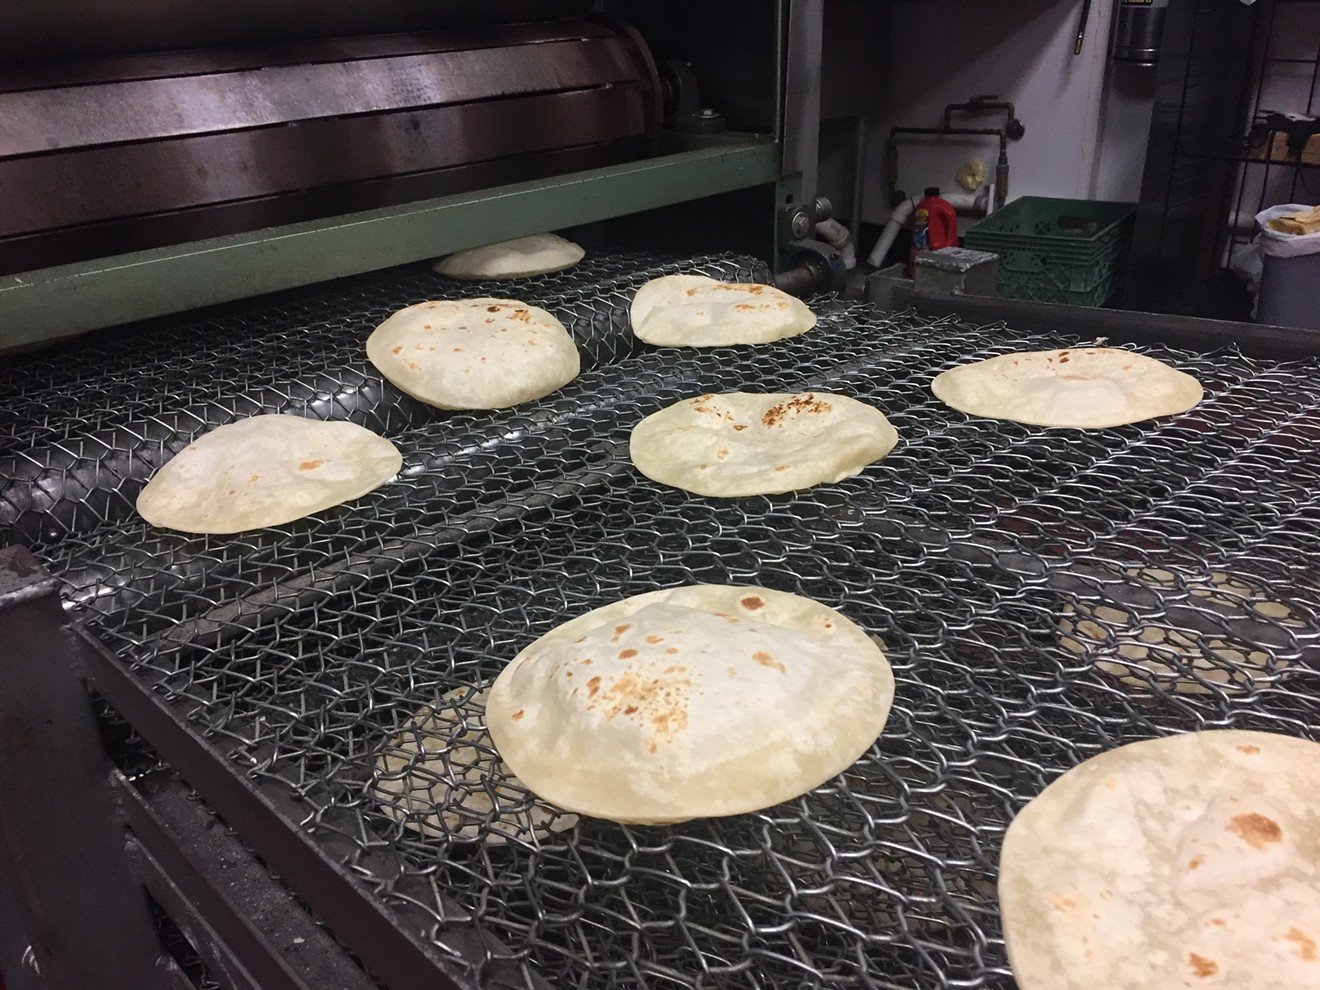 La Norteña's tortilla press can make anywhere from 12,000 to 15,000 flour and 2,000 to 3,000 corn tortillas daily.